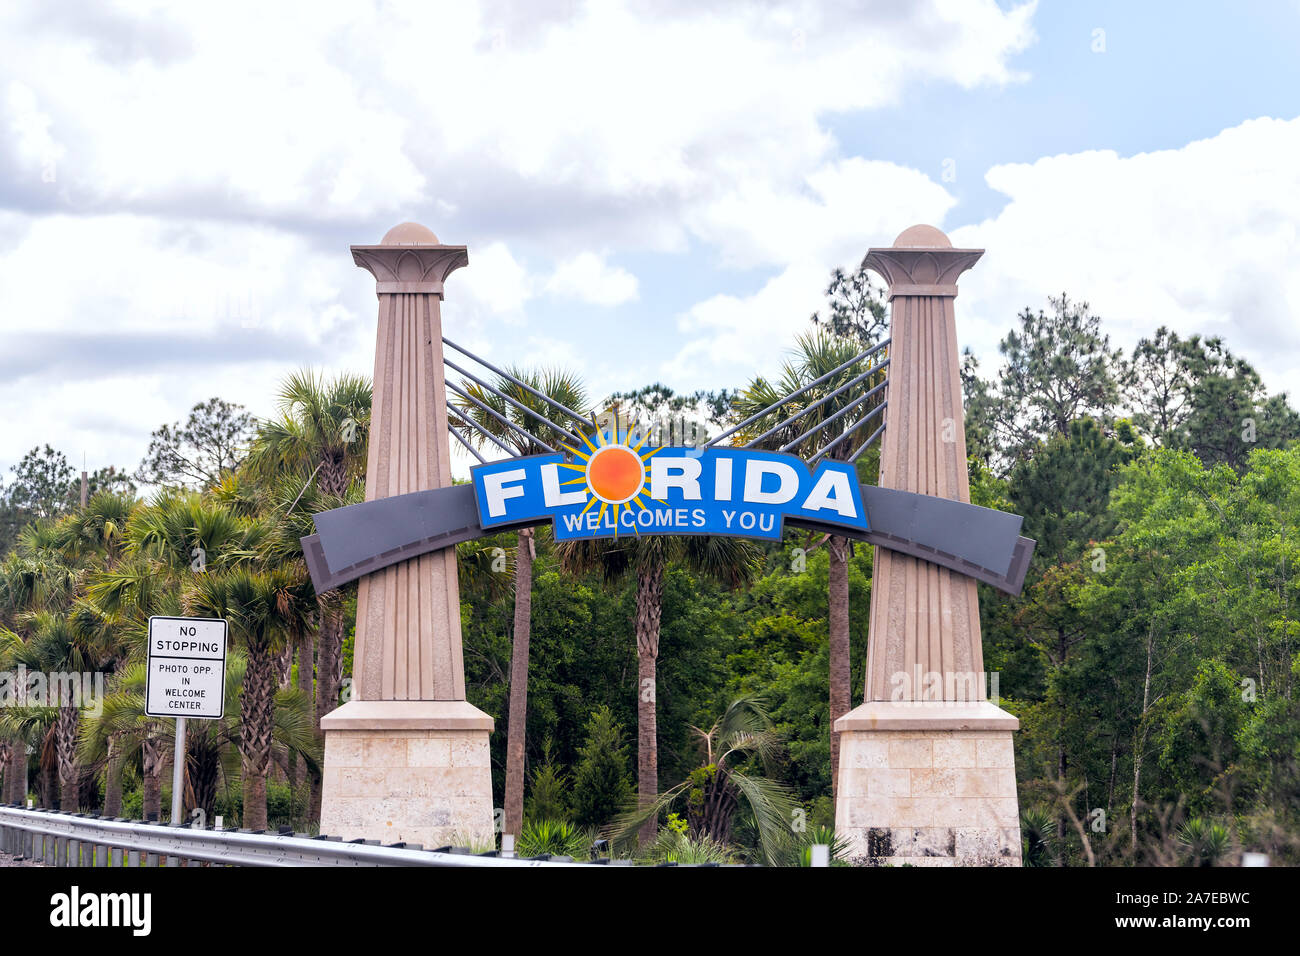 Cantonment, USA - April 24, 2018: Florida welcome center sign at border with Alabama and visitor center on highway road Stock Photo